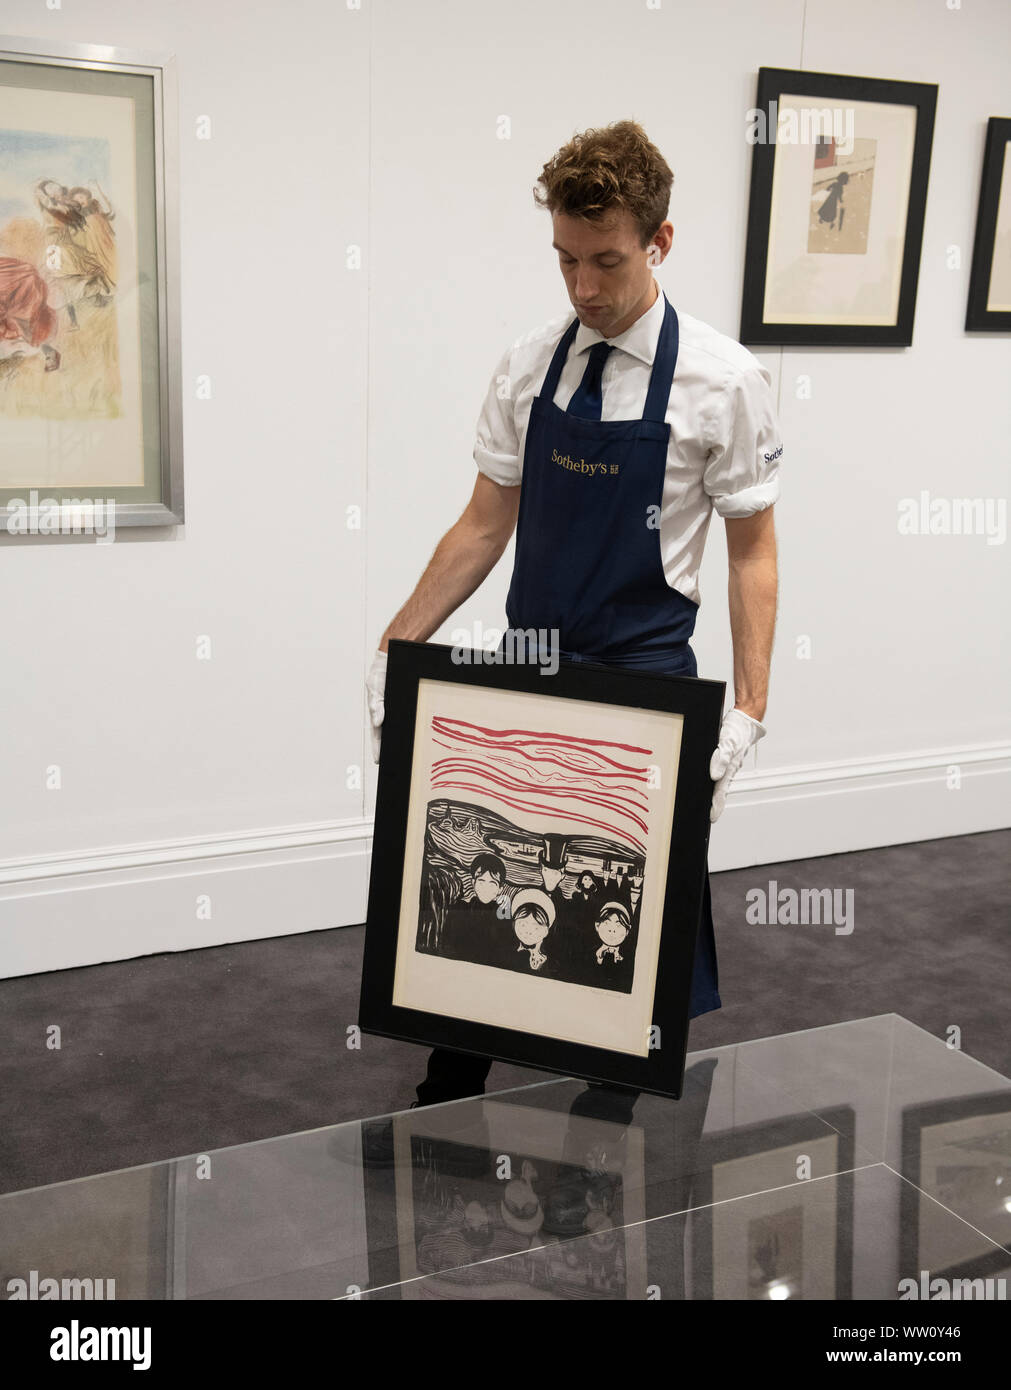 Sotheby’s, London, UK. 12th September 2019. The complete, multi-artist album Les Peintres-Graveurs will be offered at auction in London on Sept 17th, estimate £500,000 - £1,000,000. Initially produced in an edition of 100, its appearance at Sotheby’s London will mark the first time the complete portfolio has been exhibited as a whole for over a century,with all 22 prints by artists including Munch, Bonnard, Vuillard, Redon and Renoir. Image Sotheby’s art handler holds Edvard Munch’s Angst (or Le Soir), a work from the collection. Credit: Malcolm Park/Alamy Live News. Stock Photo